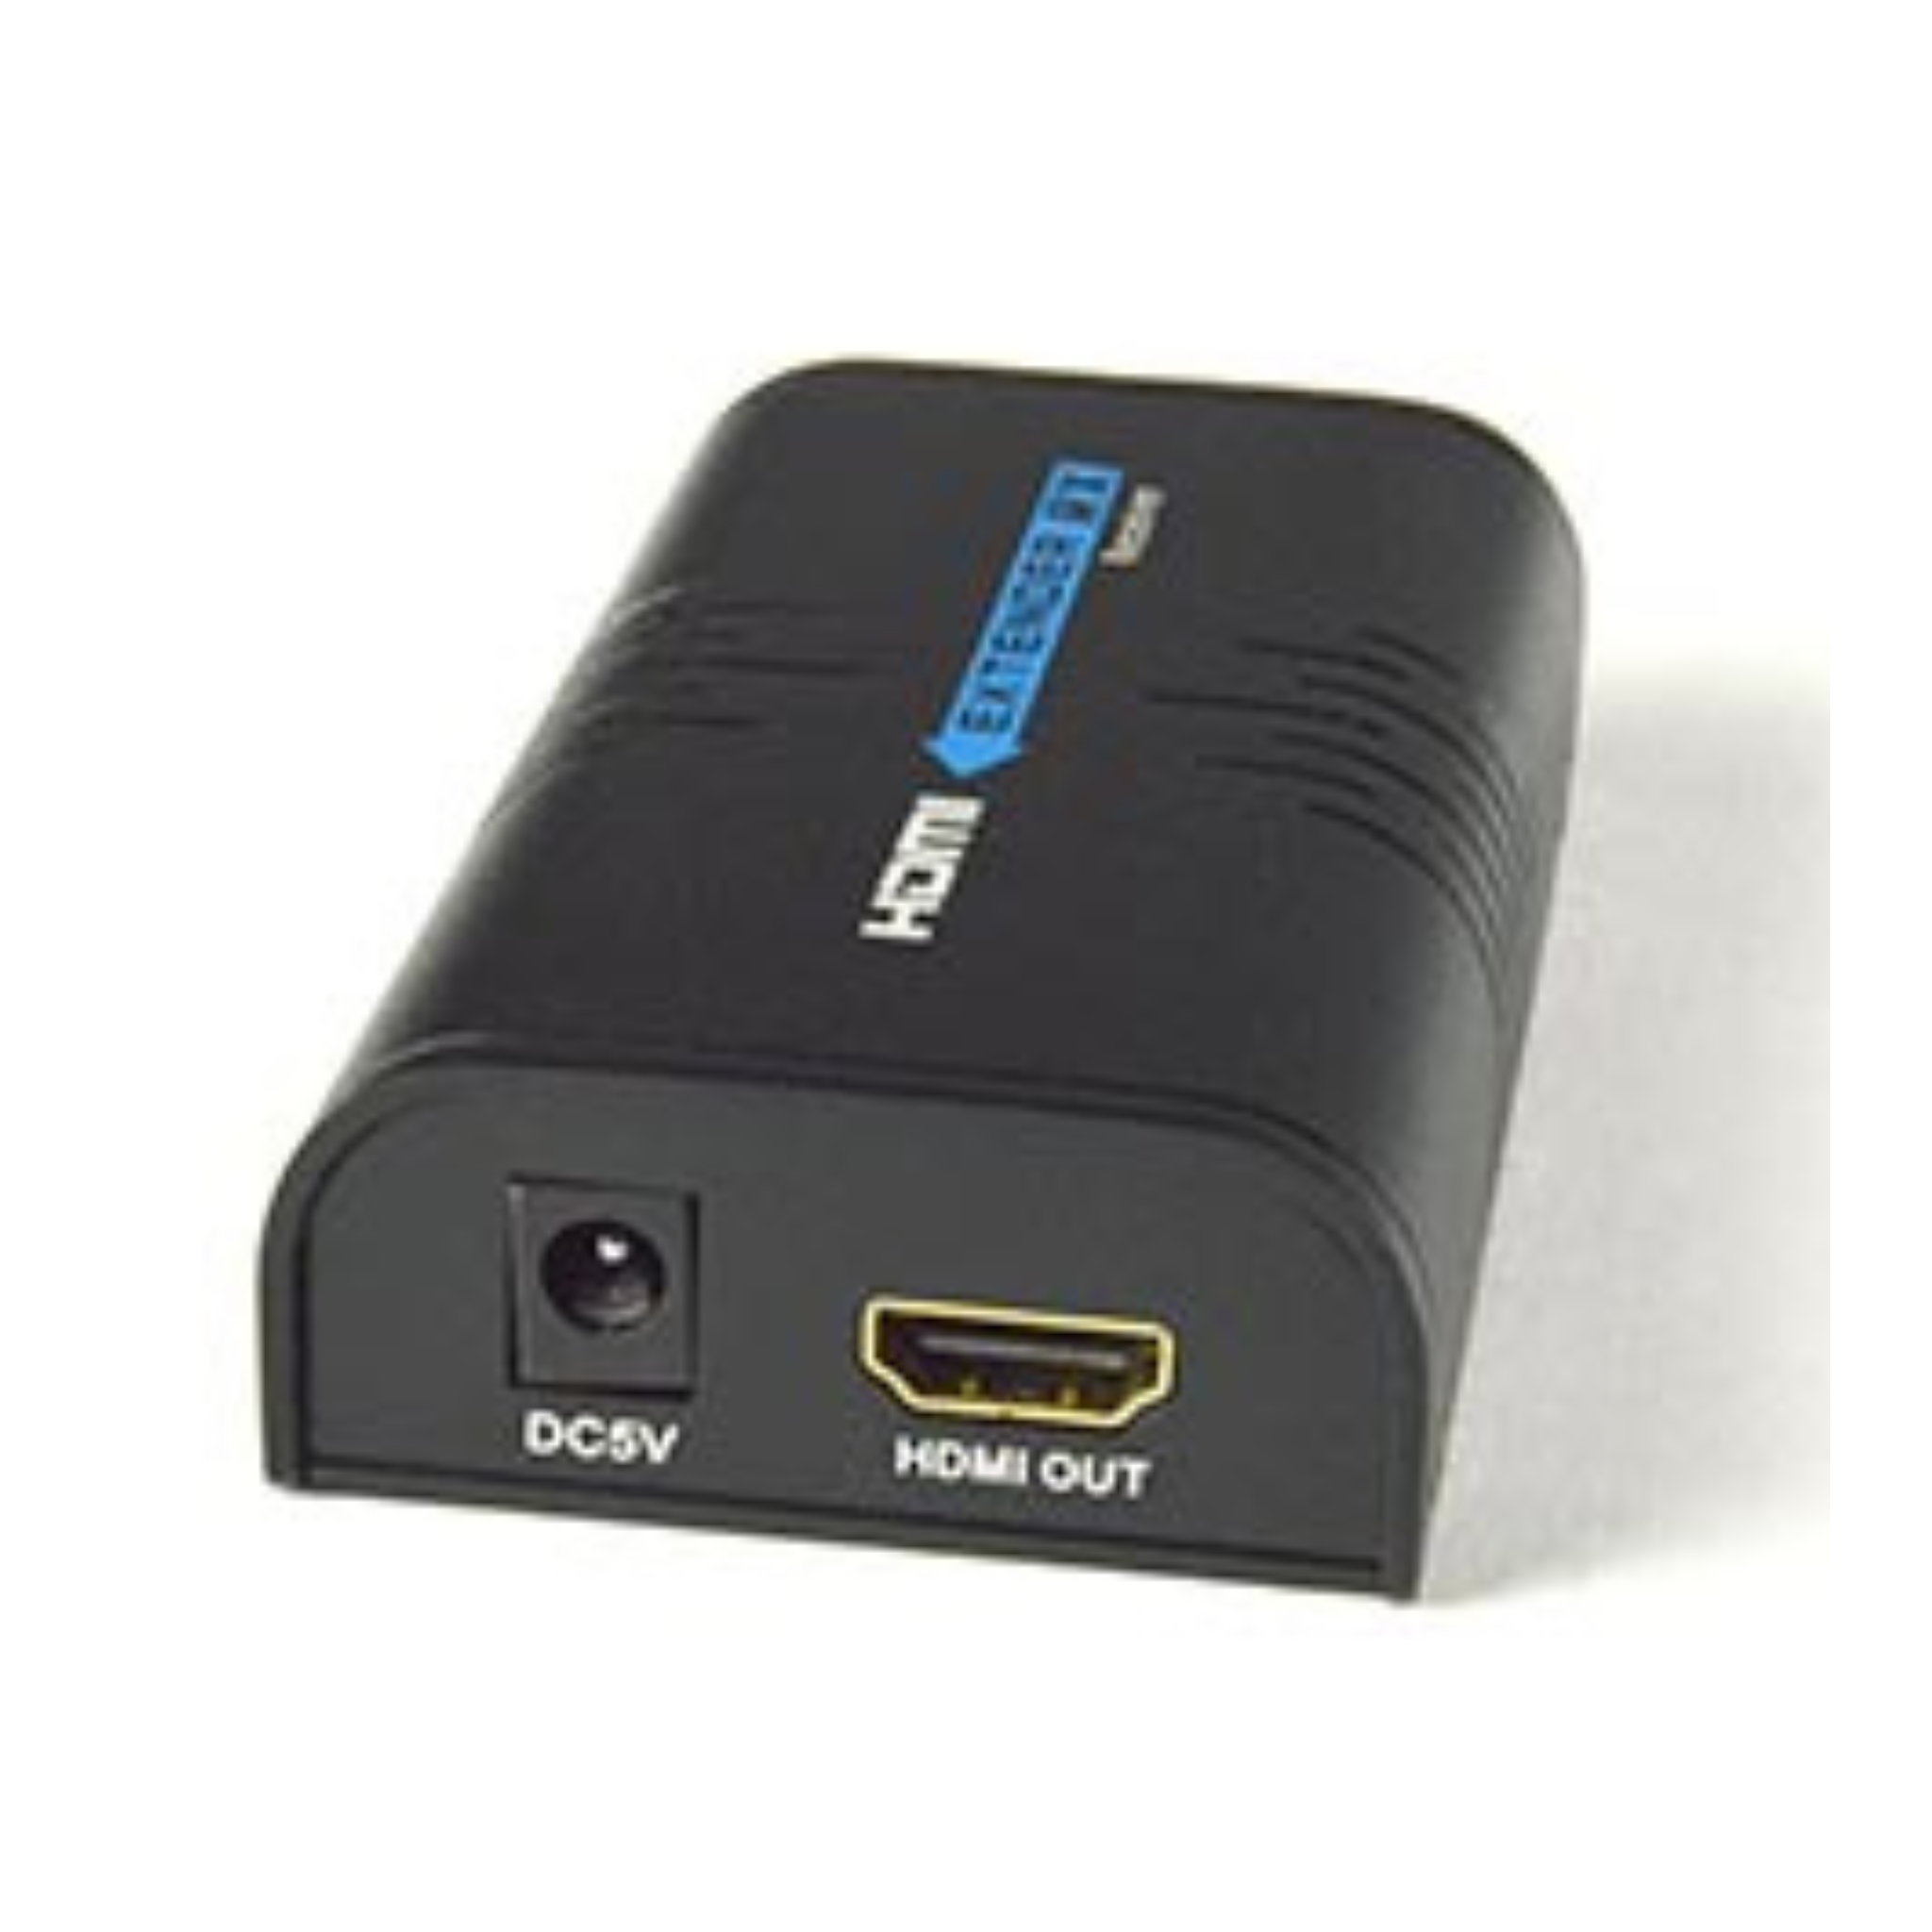 HDMI Over Gigabit IP Network Range Extender 394 feet away over a 100/1000 Base-T Gigabit Network connected with CAT6/6a/7 cable. Includes Receiver and Transmitter